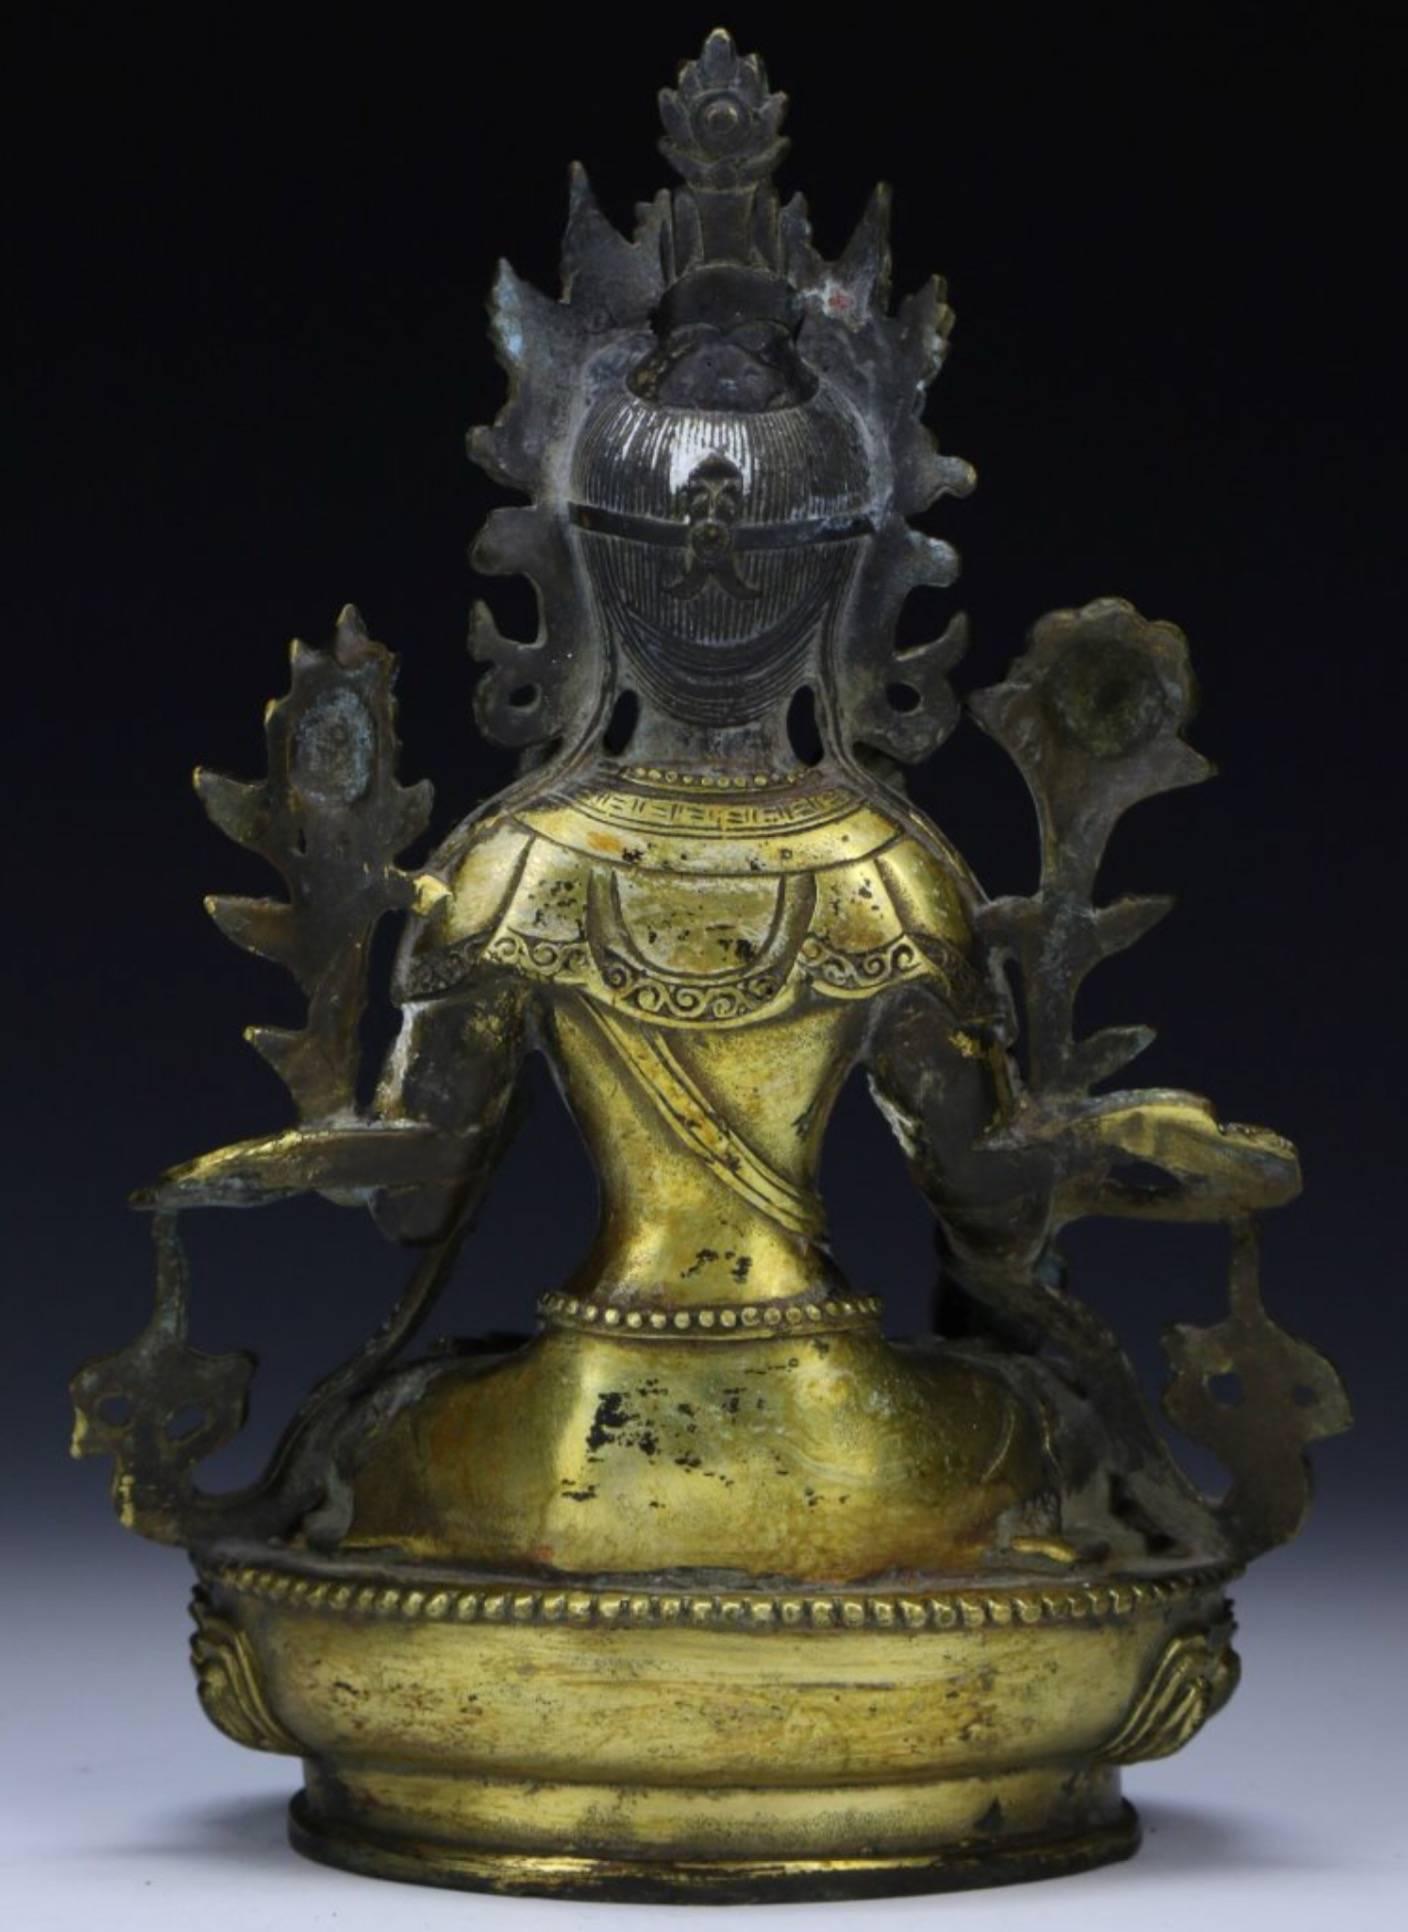 A gilt Tibetan bronze Buddha or Tara, seated with on hand raised and the other holding a sceptre. Original sealed base with rattling contents and Ming Yin/Yang symbol seal. Qing Dynasty.

Height: 8.5 Inches
Width: 6 Inches

Condition: Some loss to